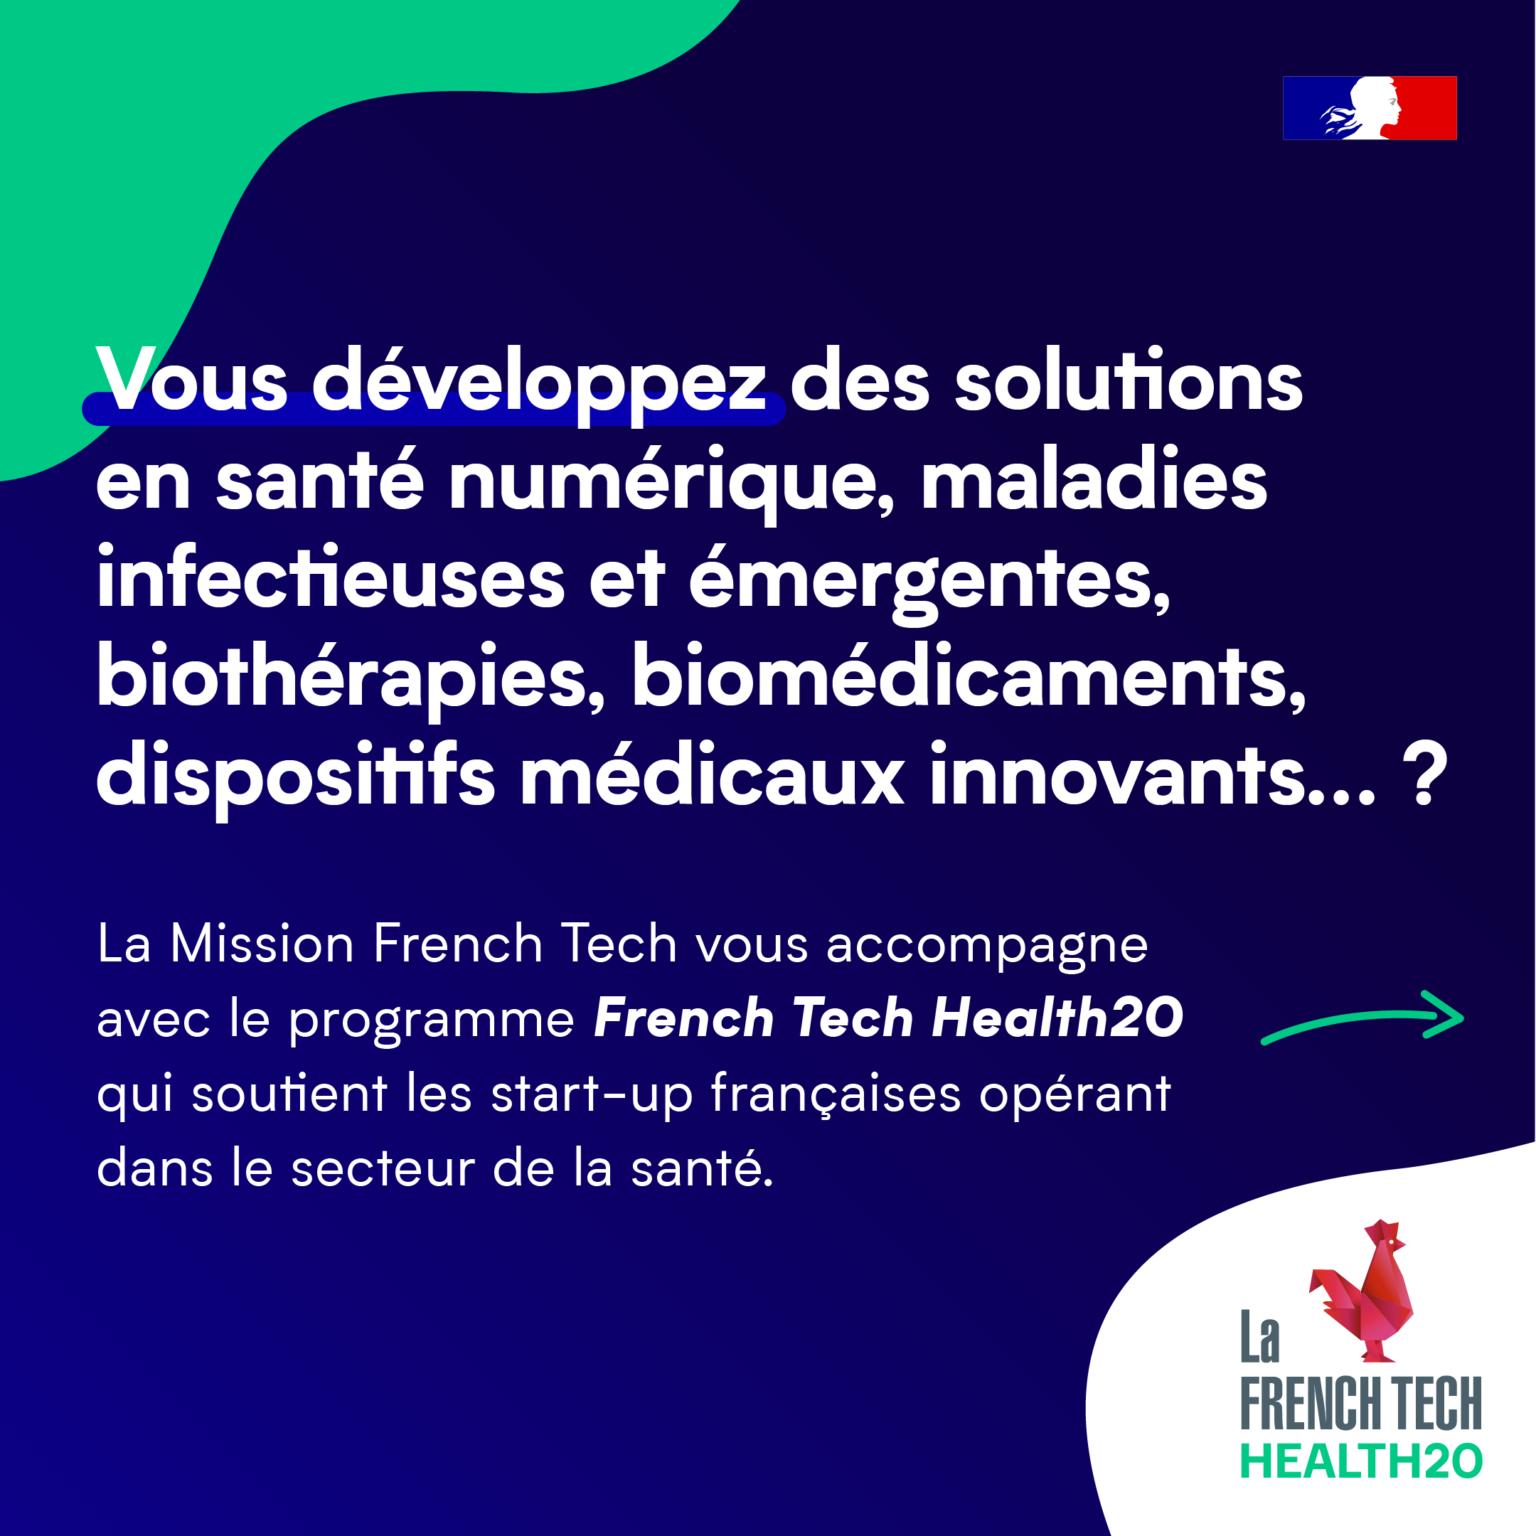 French Tech Health20